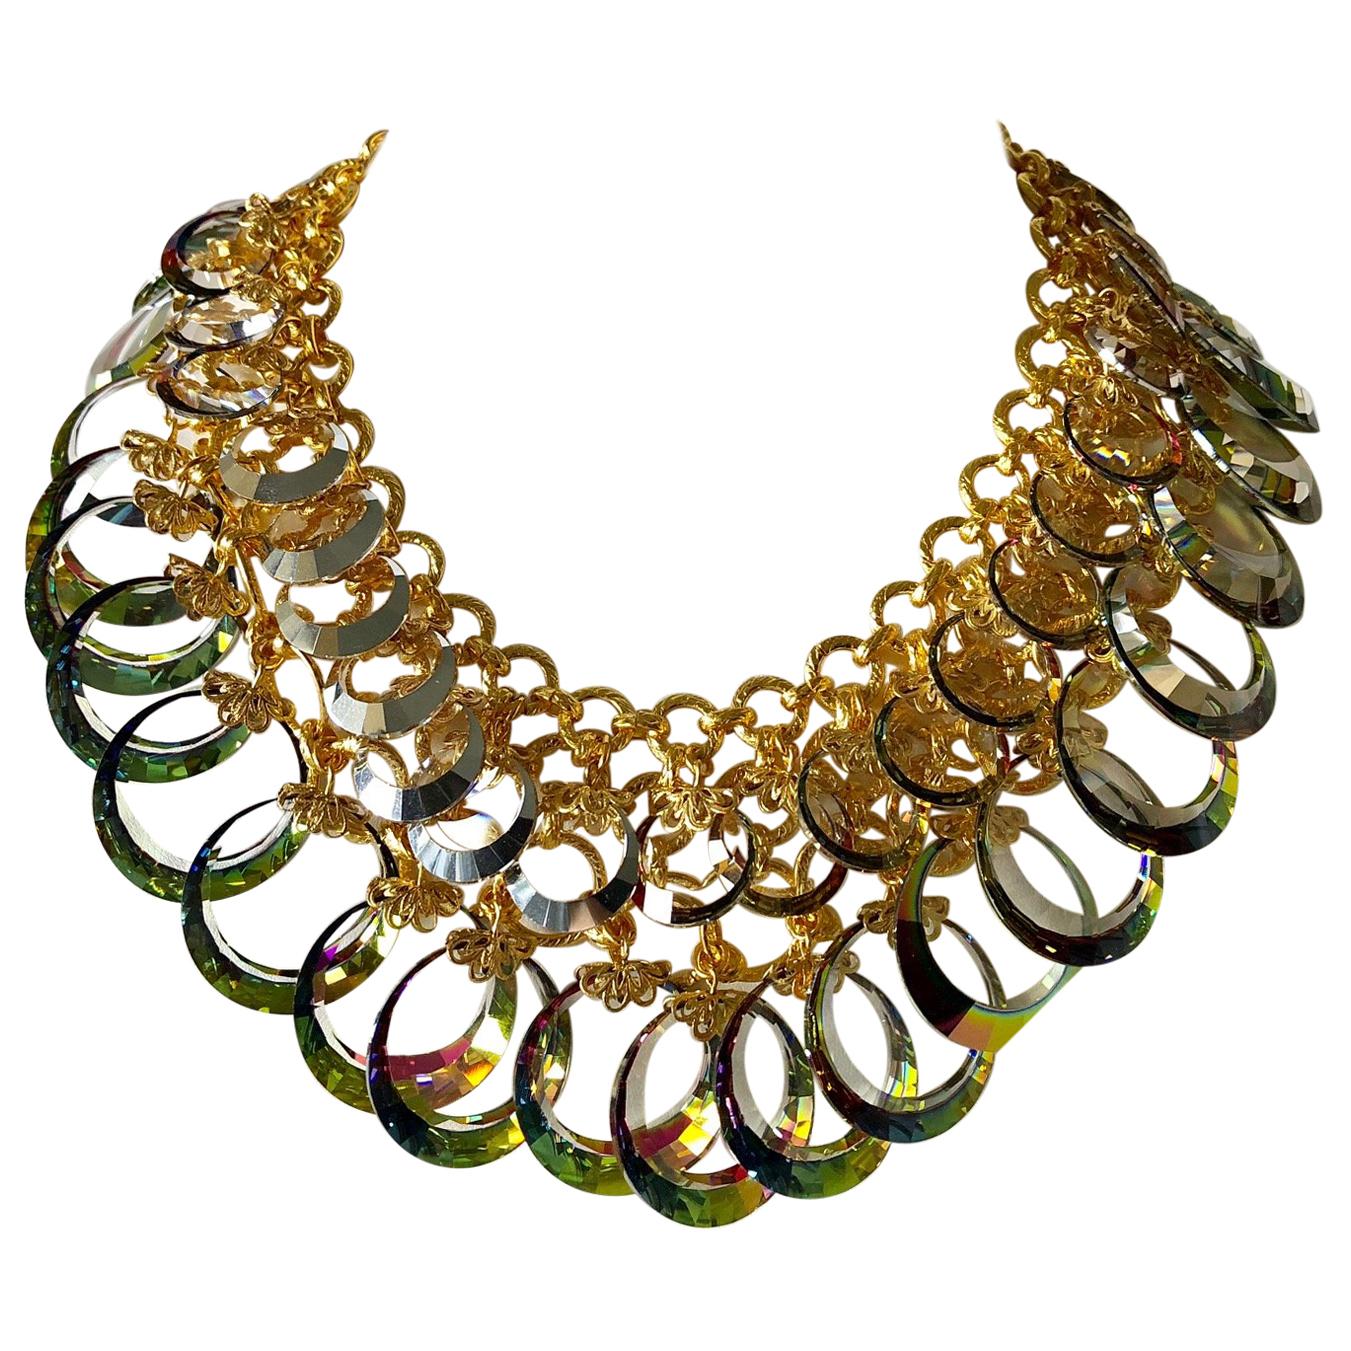 Vintage French Haute Couture Gold Crystal Statement Bib Necklace 